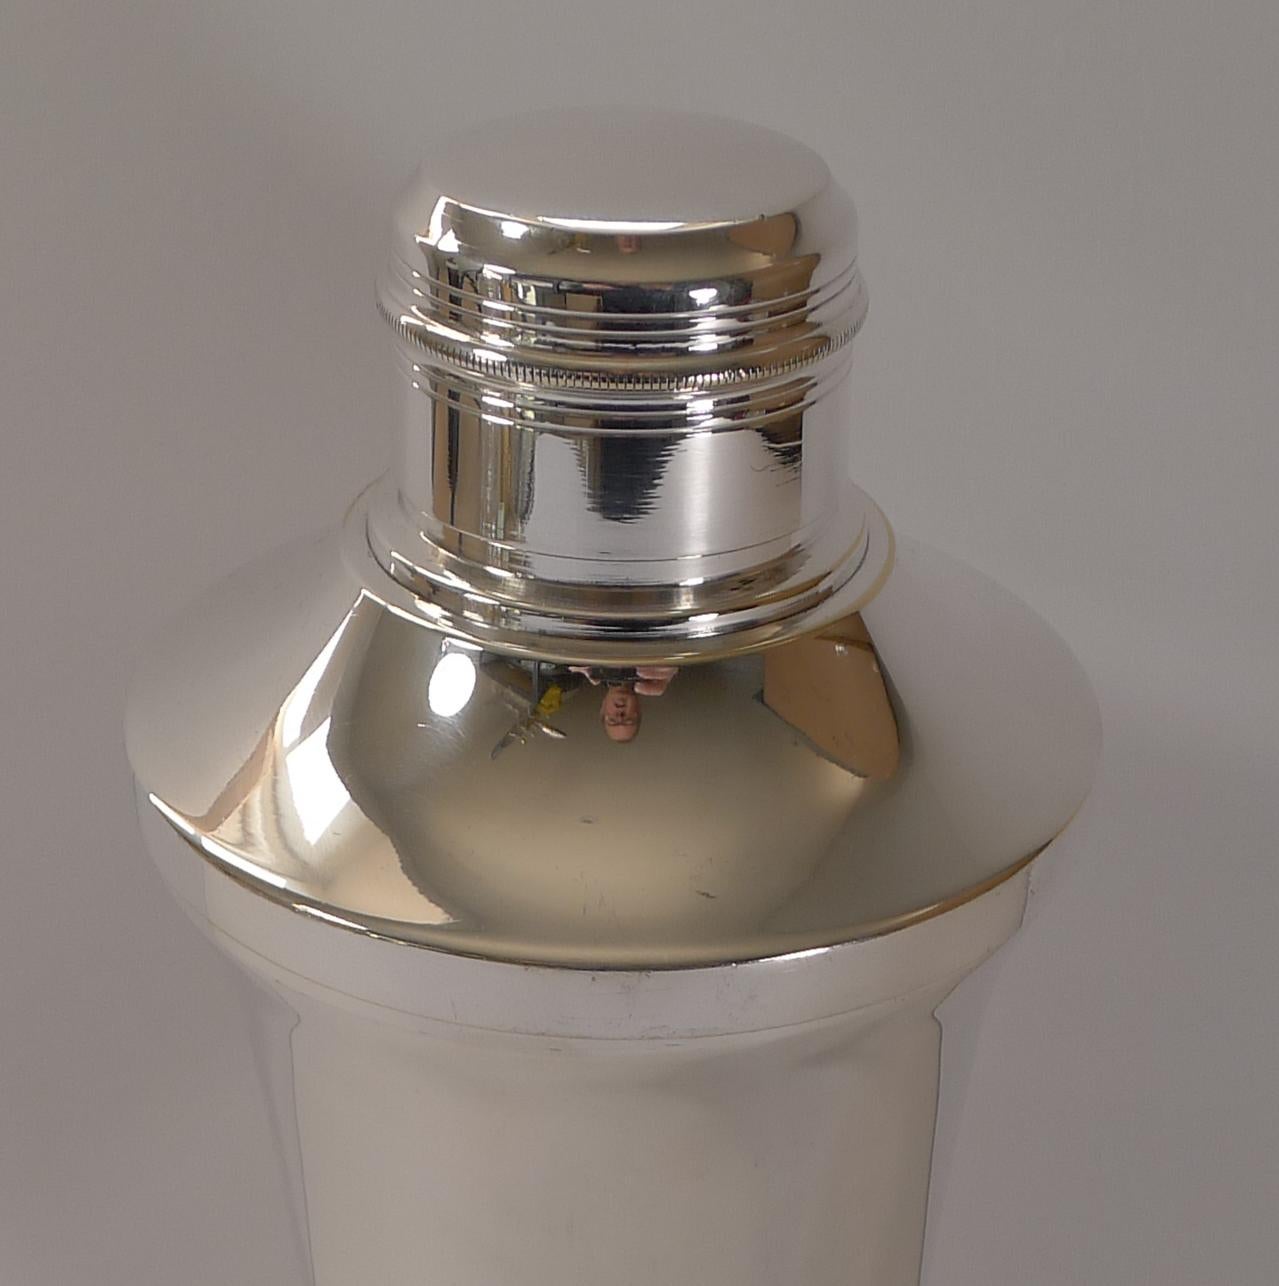 A very smart Art Deco cocktail shaker, French in origin and fully signed by the silversmith on the underside as per the photographs.

Just back from our silversmith's workshop where it has been professionally cleaned and polished, restoring it to